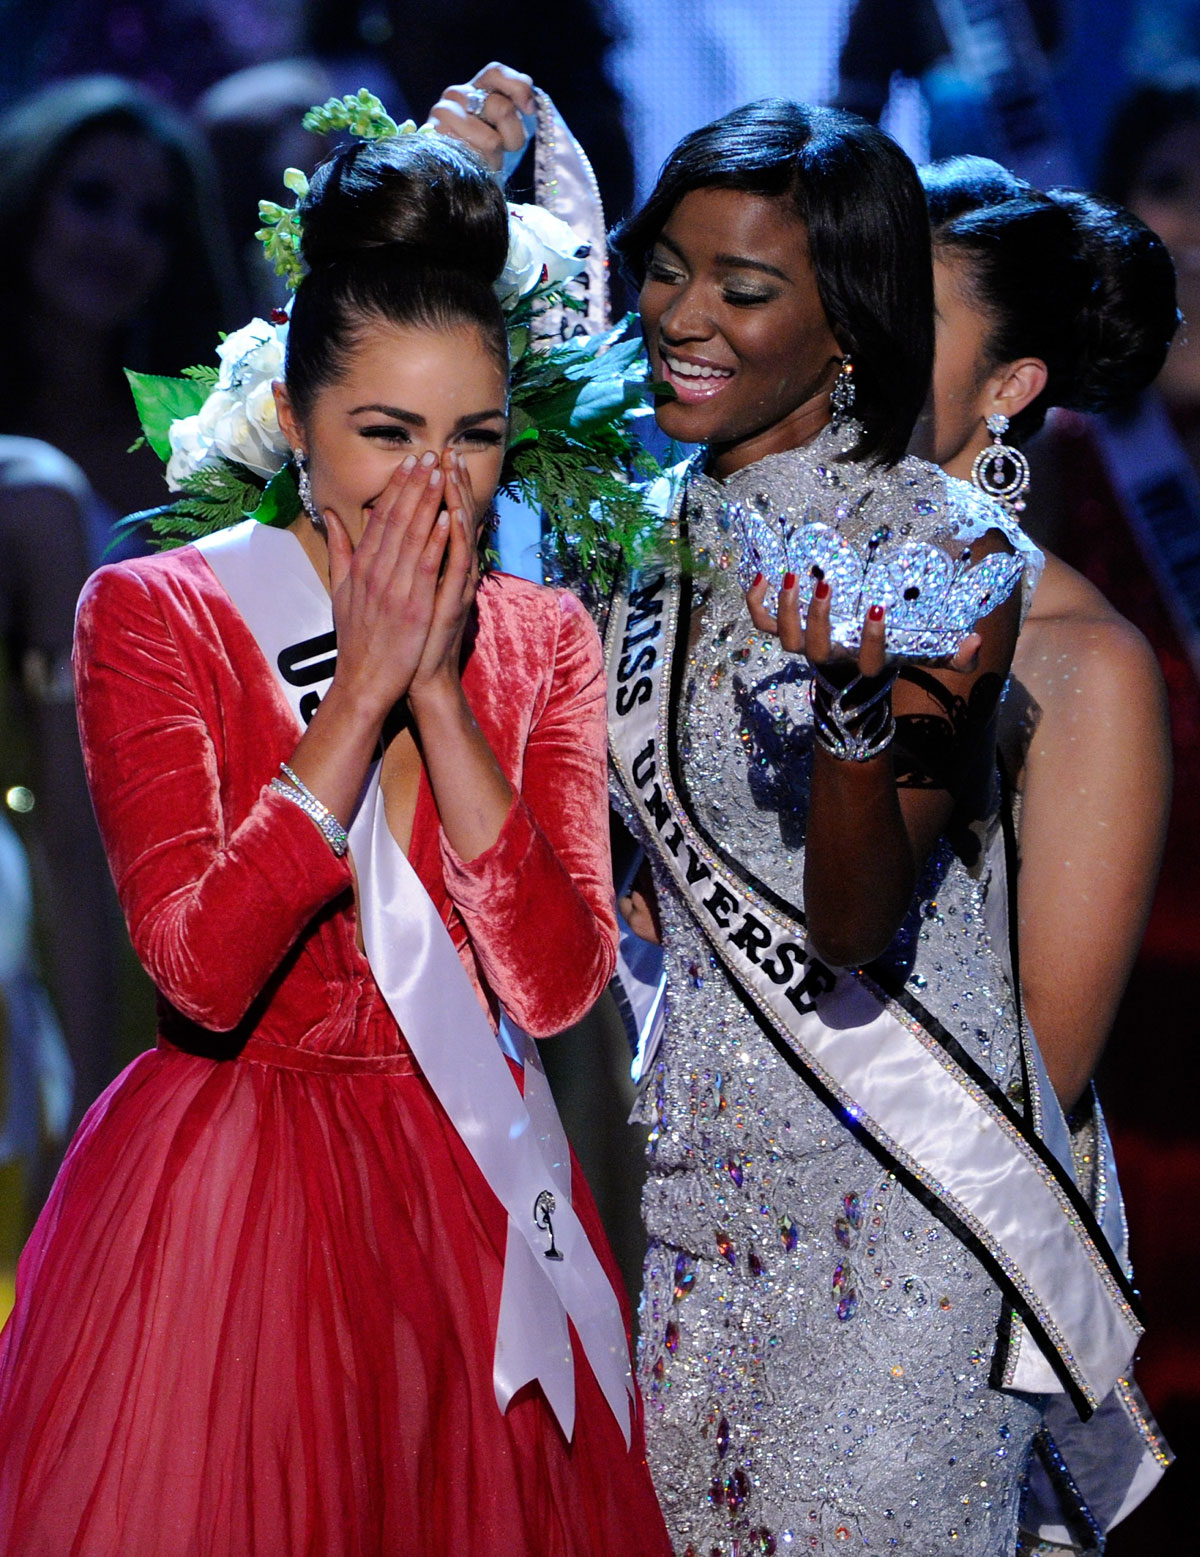 OLIVIA-CULPO-as-Miss-Universe-at-the-2012-Miss-Universe-Pageant-in-Las-Vegas-4.jpg